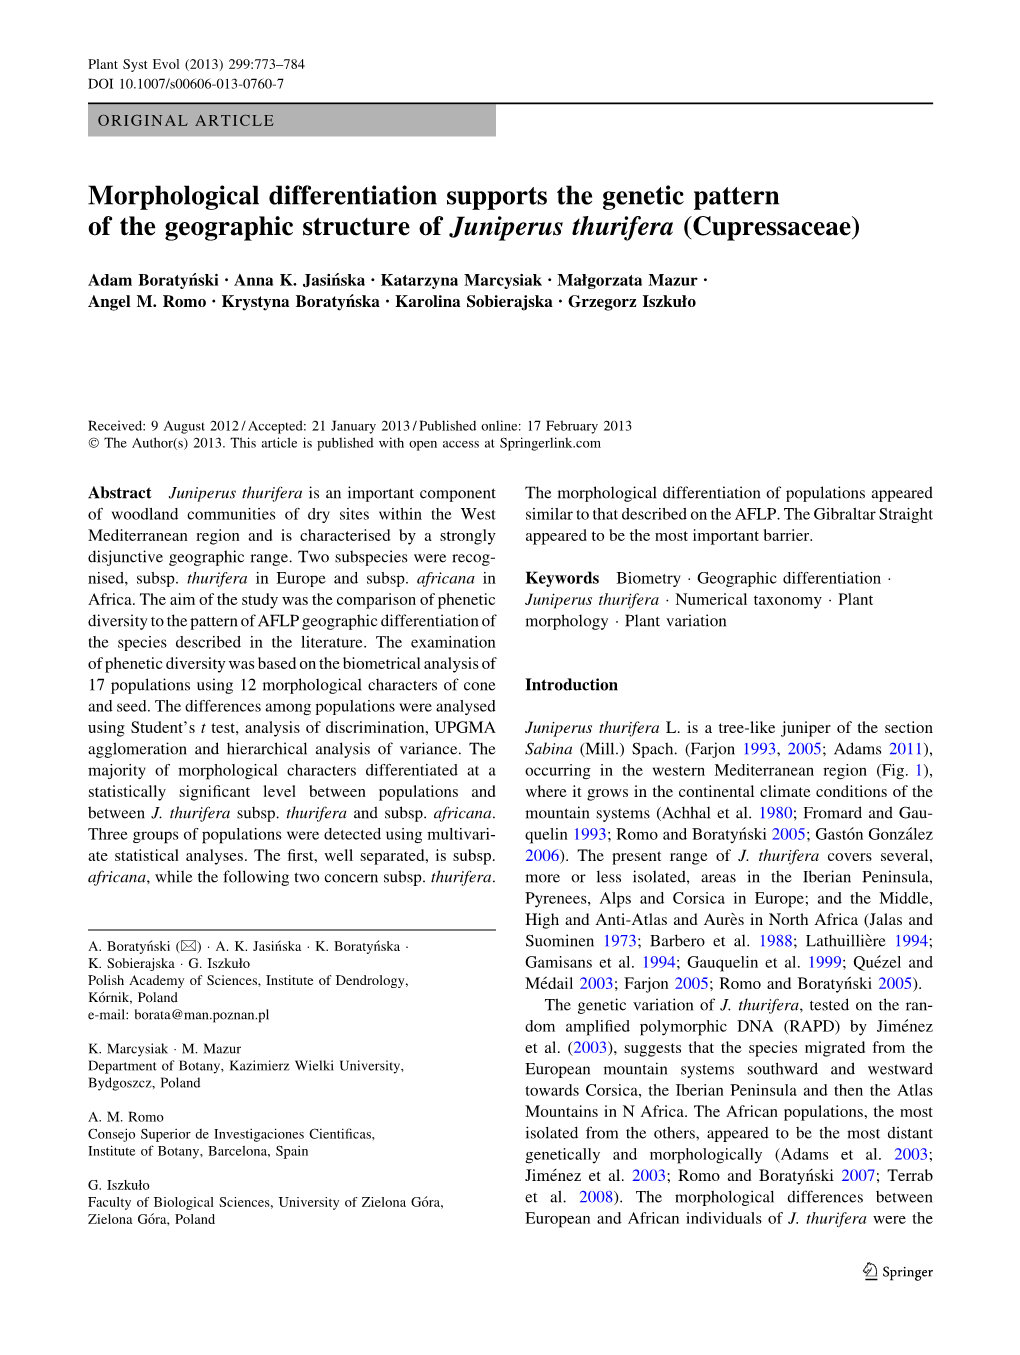 Morphological Differentiation Supports the Genetic Pattern of the Geographic Structure of Juniperus Thurifera (Cupressaceae)